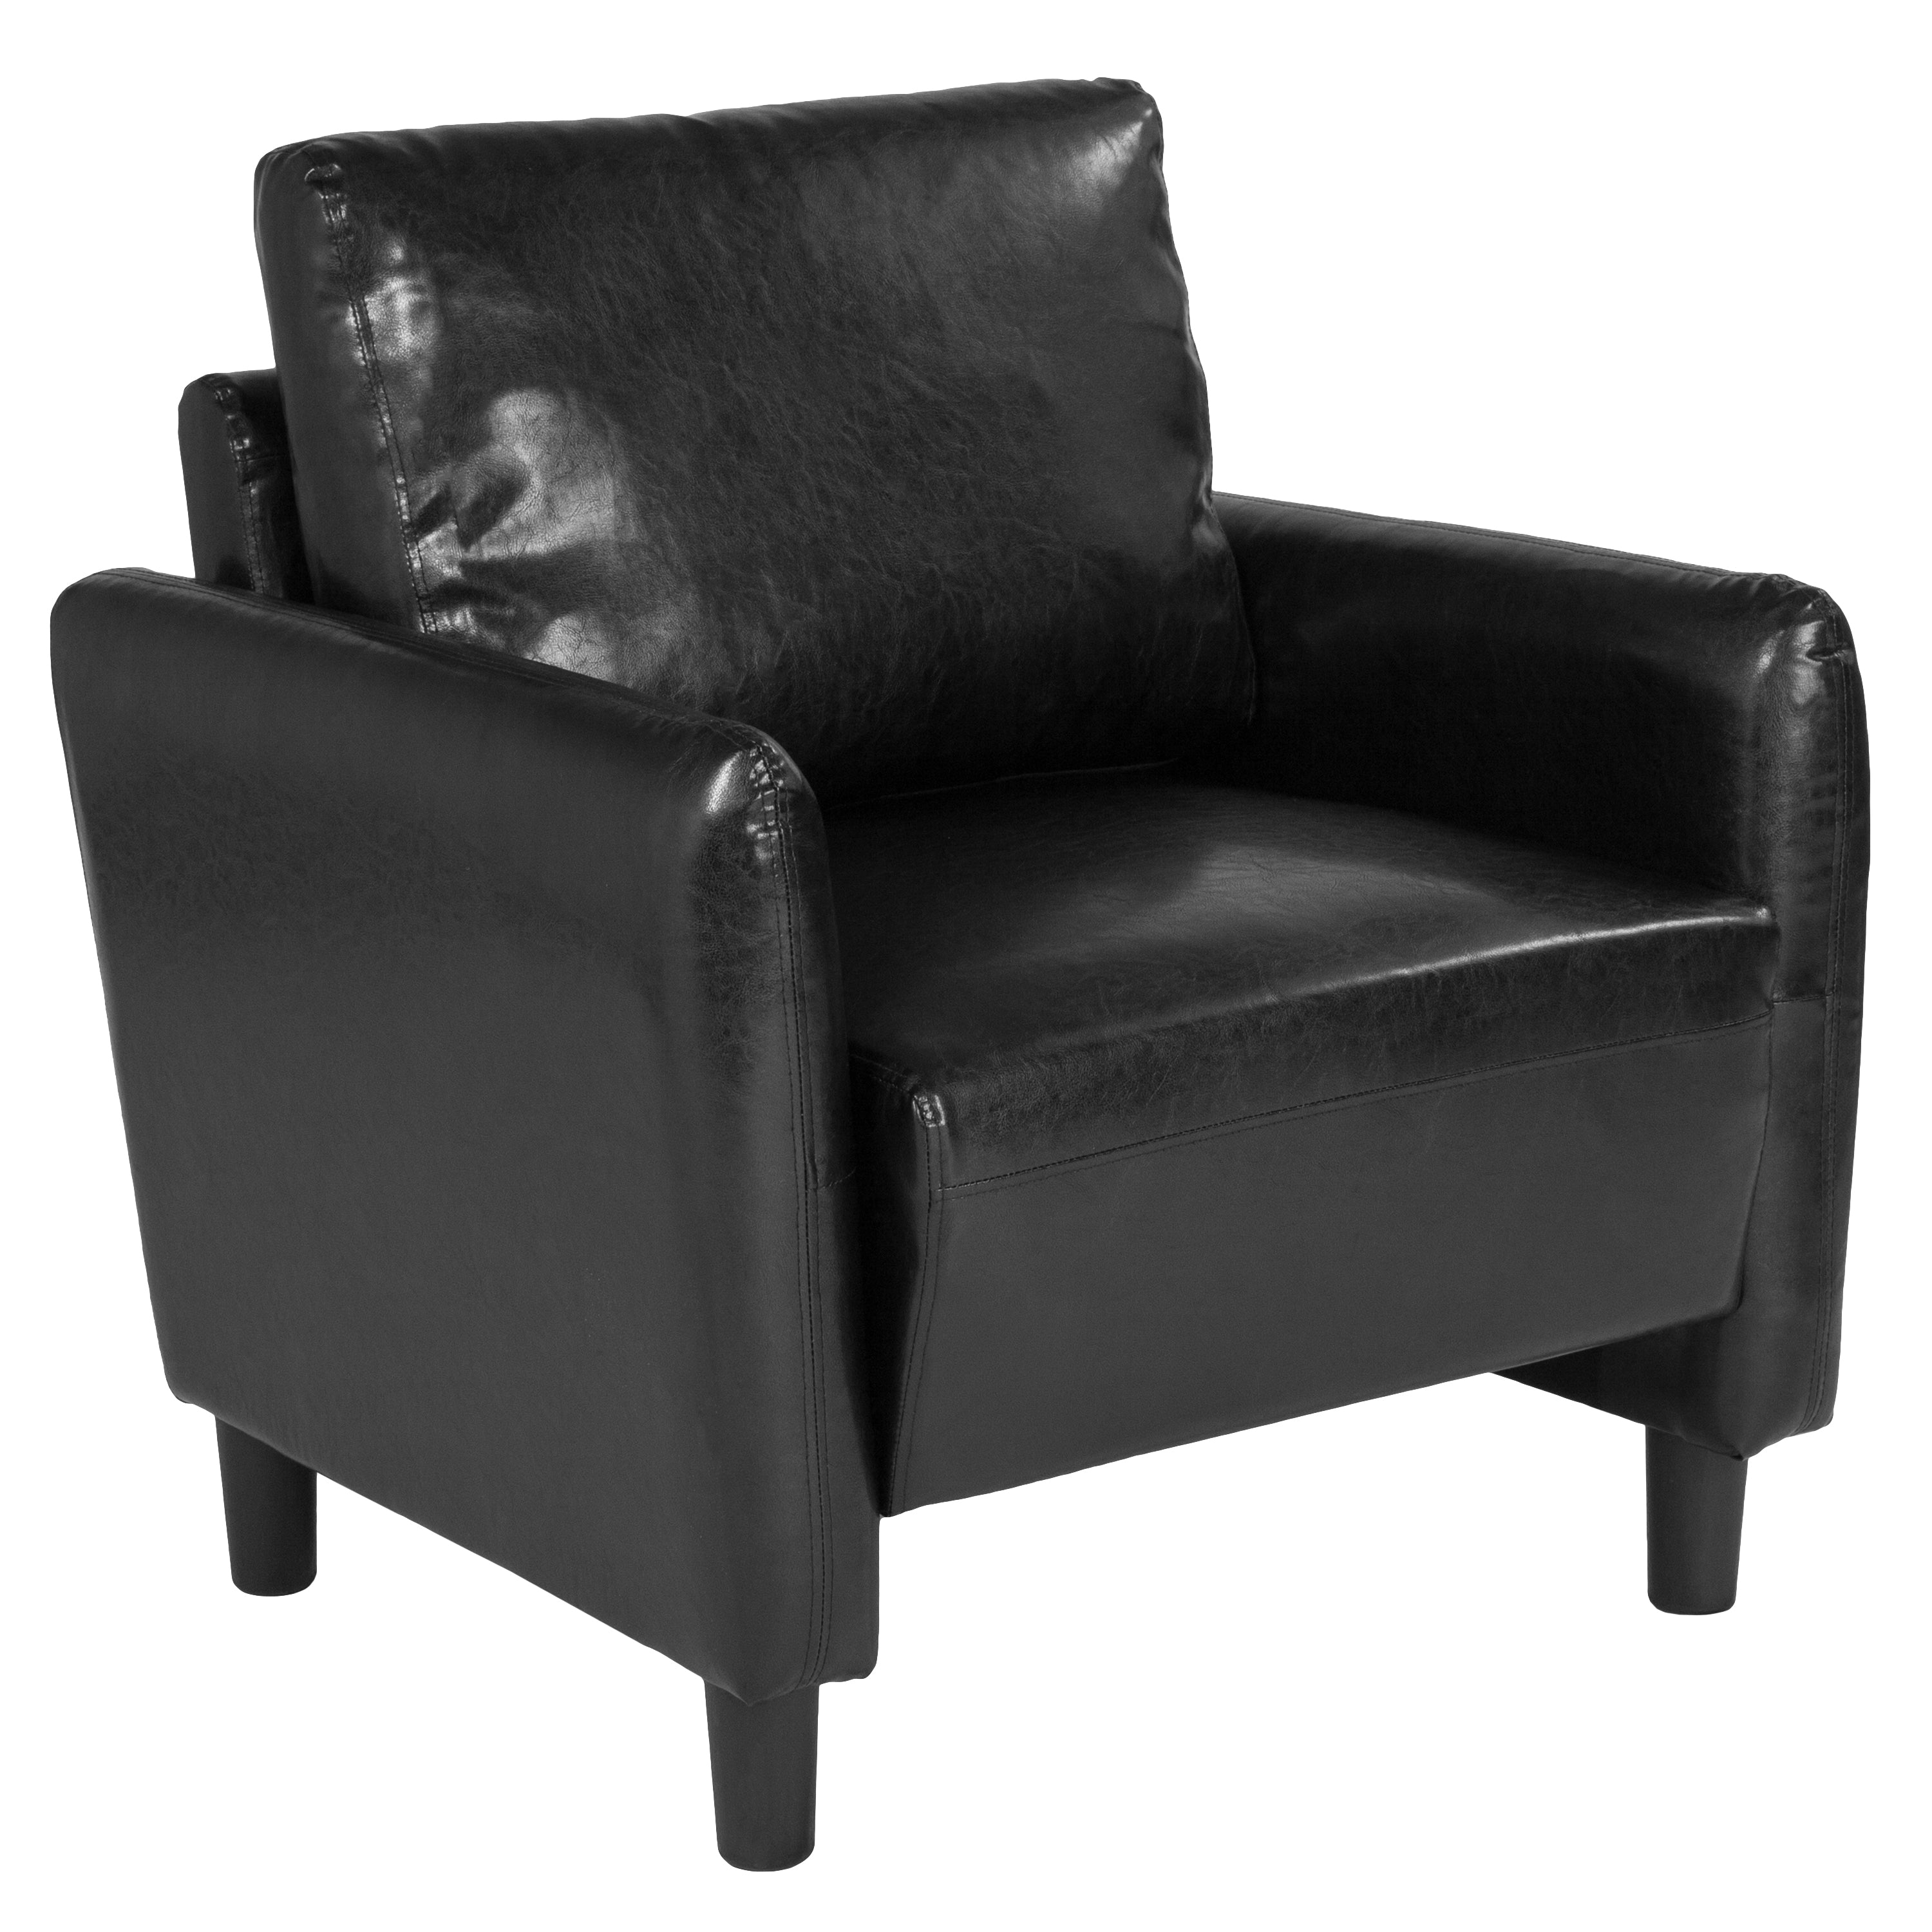 Candler Park Upholstered Chair-Chair-Flash Furniture-Wall2Wall Furnishings